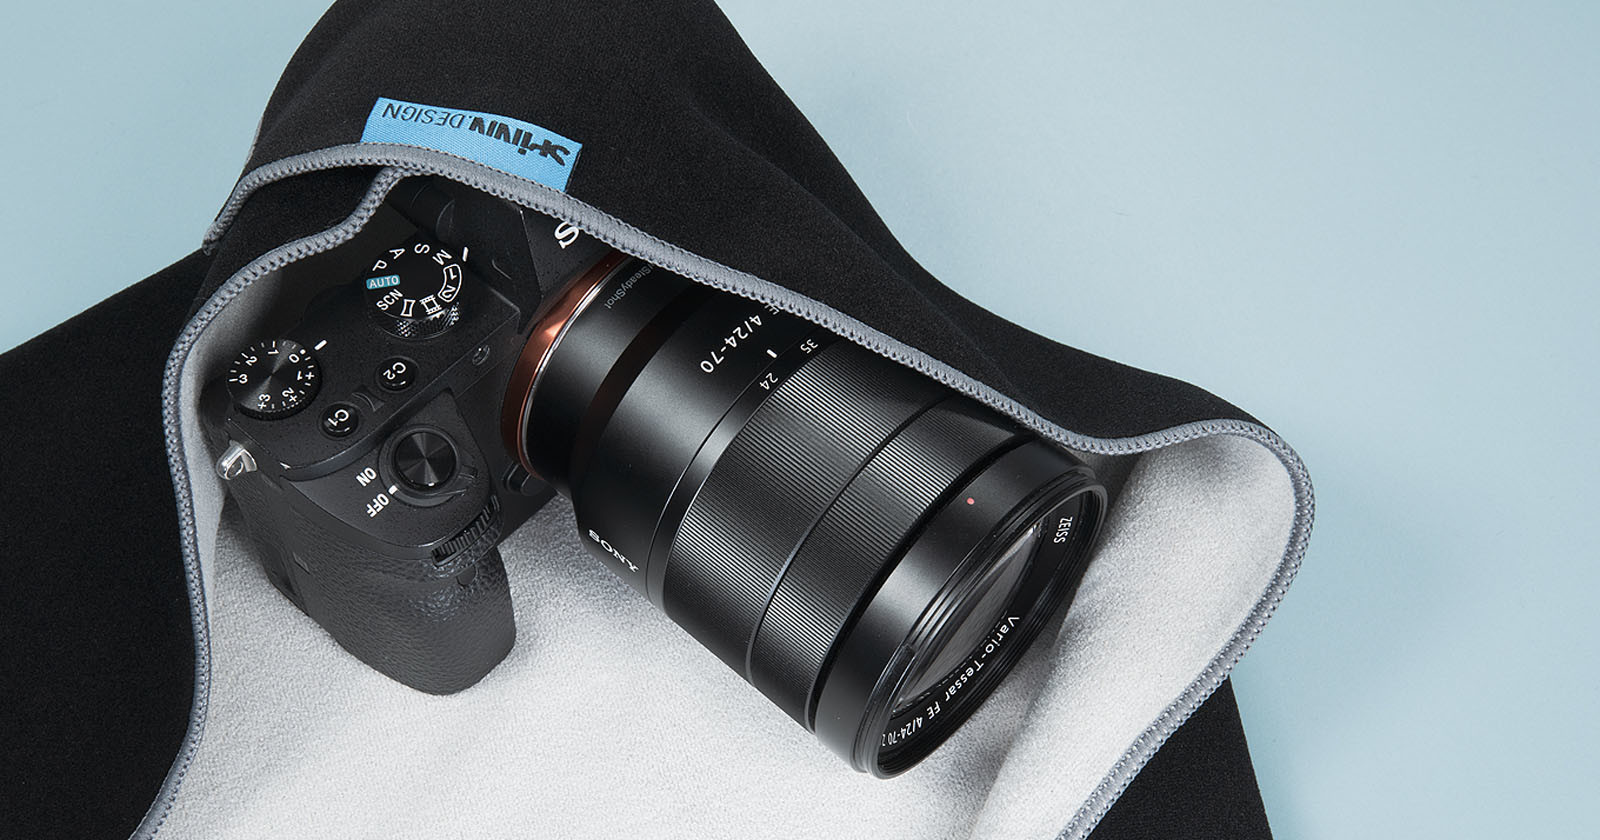 The Spinn CW.01 is a Soft Yet Self-Adhesive Protective Wrap for Cameras